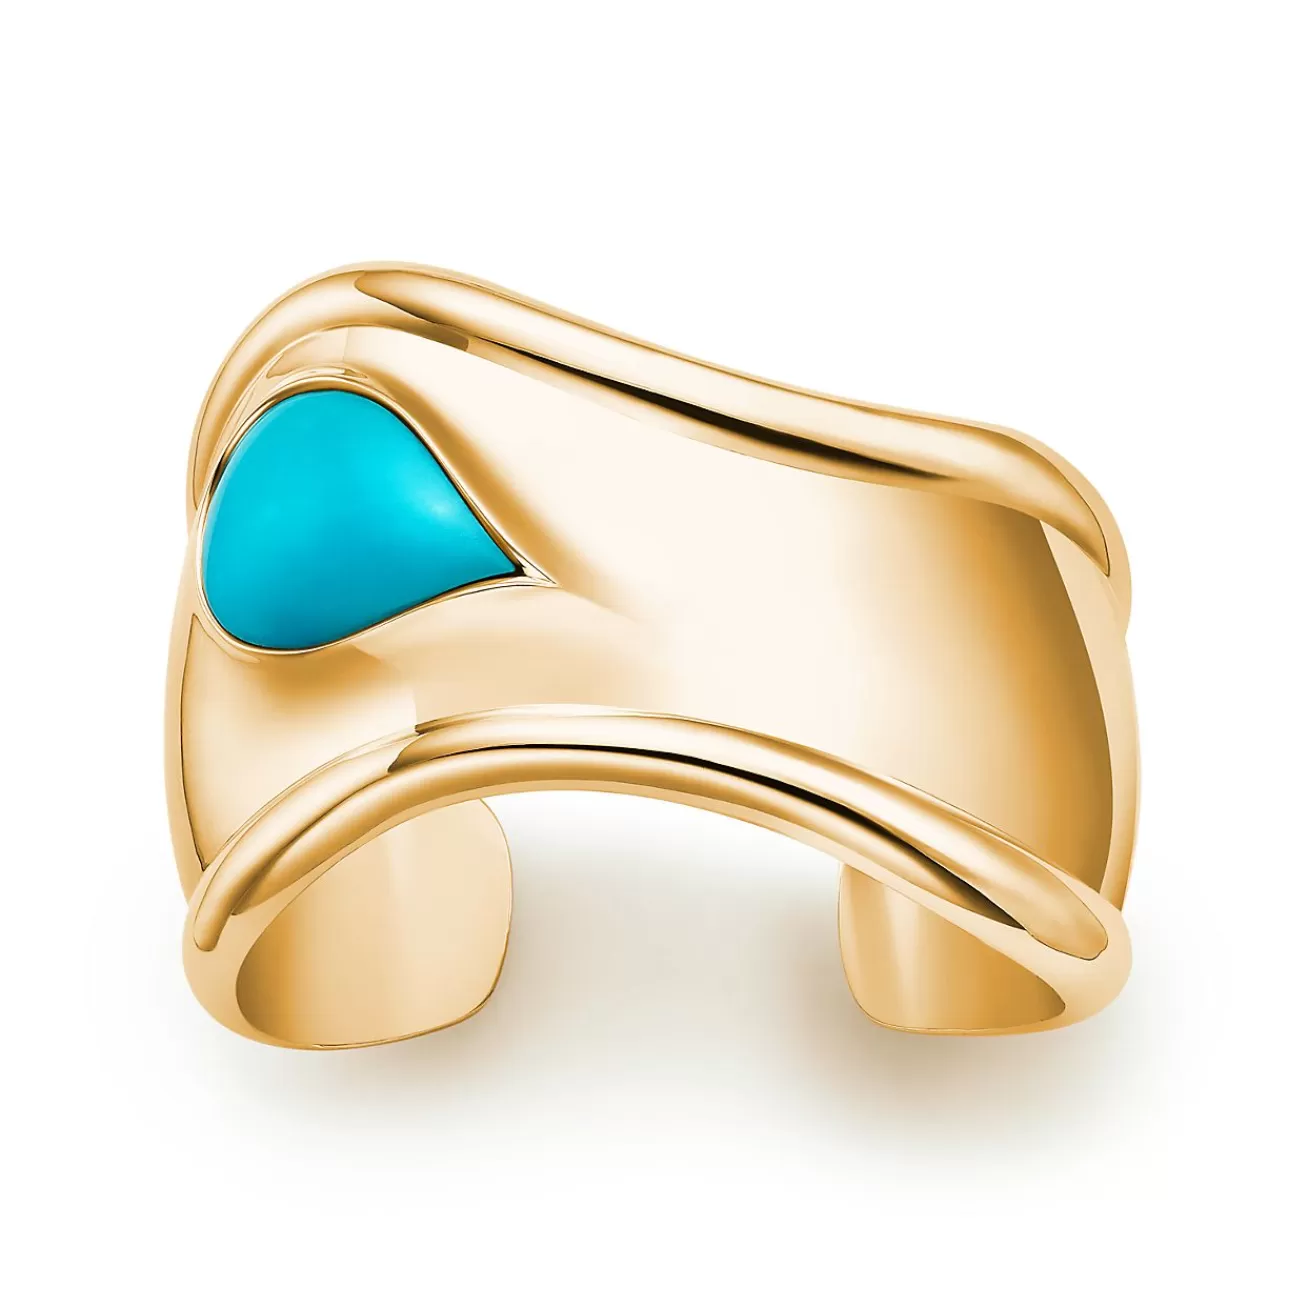 Tiffany & Co. Elsa Peretti® Small Bone Cuff in Yellow Gold with Turquoise, 43 mm Wide | ^ Bracelets | Gold Jewelry